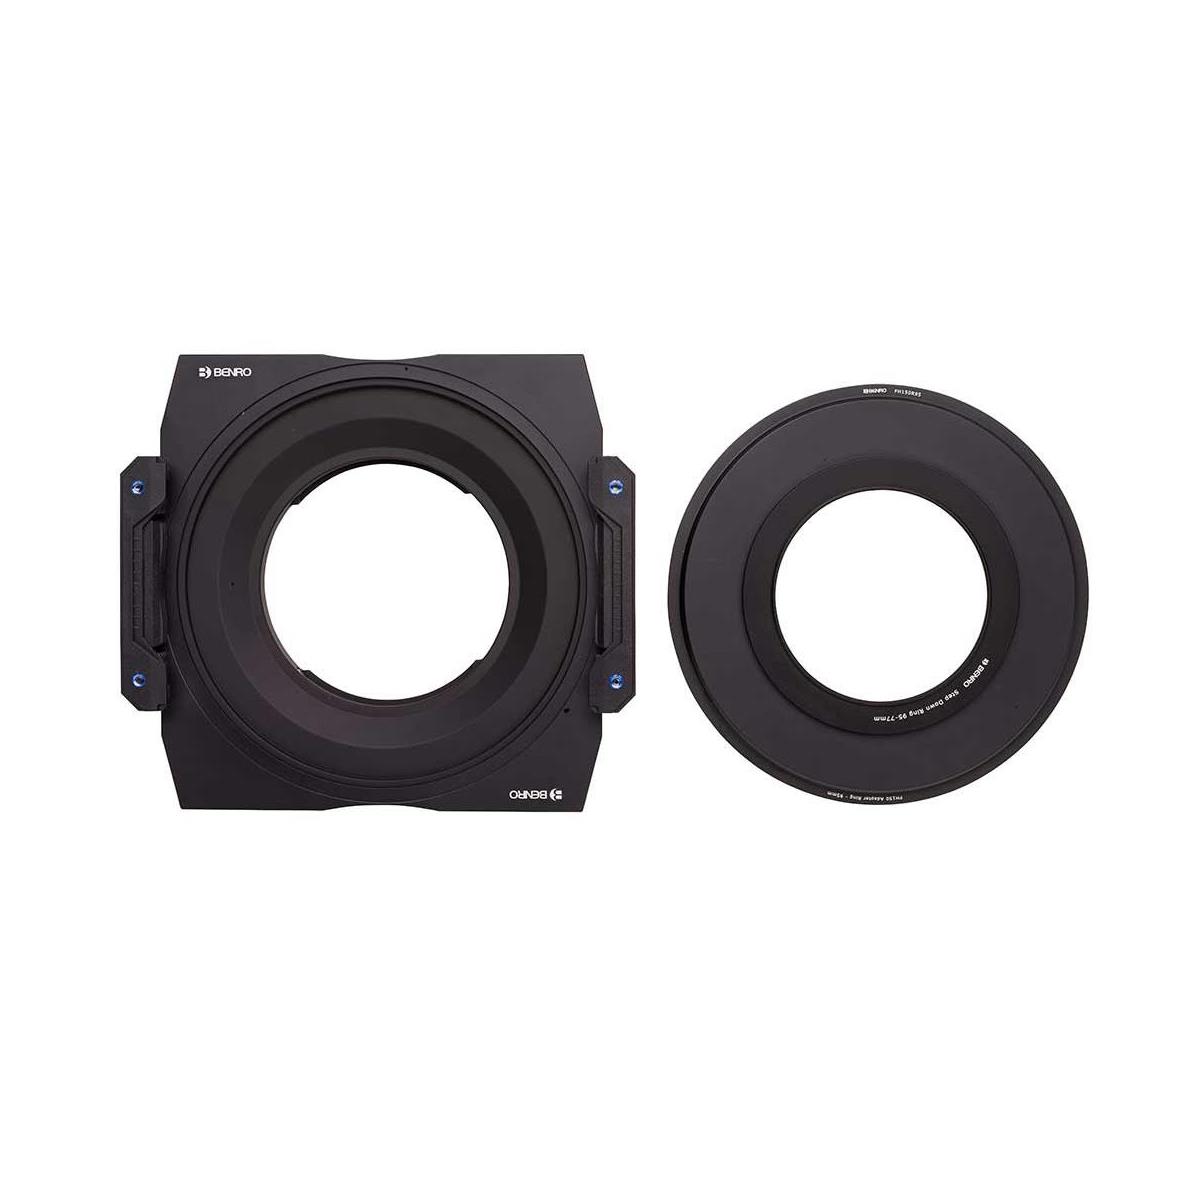 Image of Benro Master Series FH150R95 150mm Filter Holder for Canon TS-E 17mm f/4L Lens